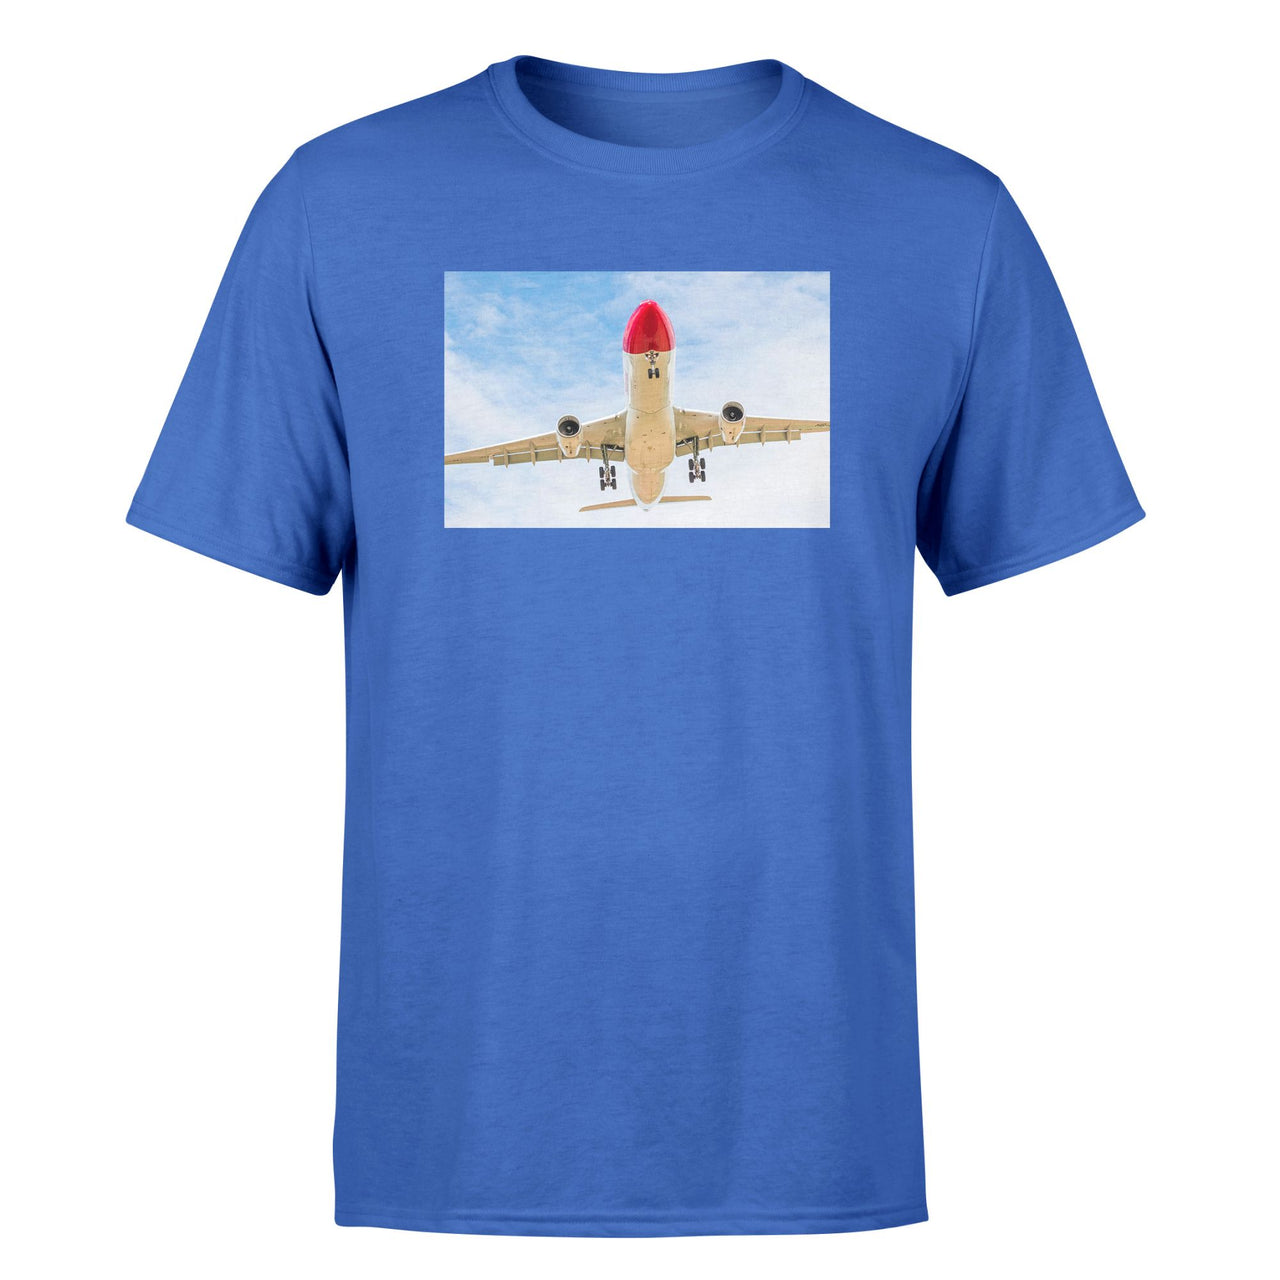 Beautiful Airbus A330 on Approach Designed T-Shirts